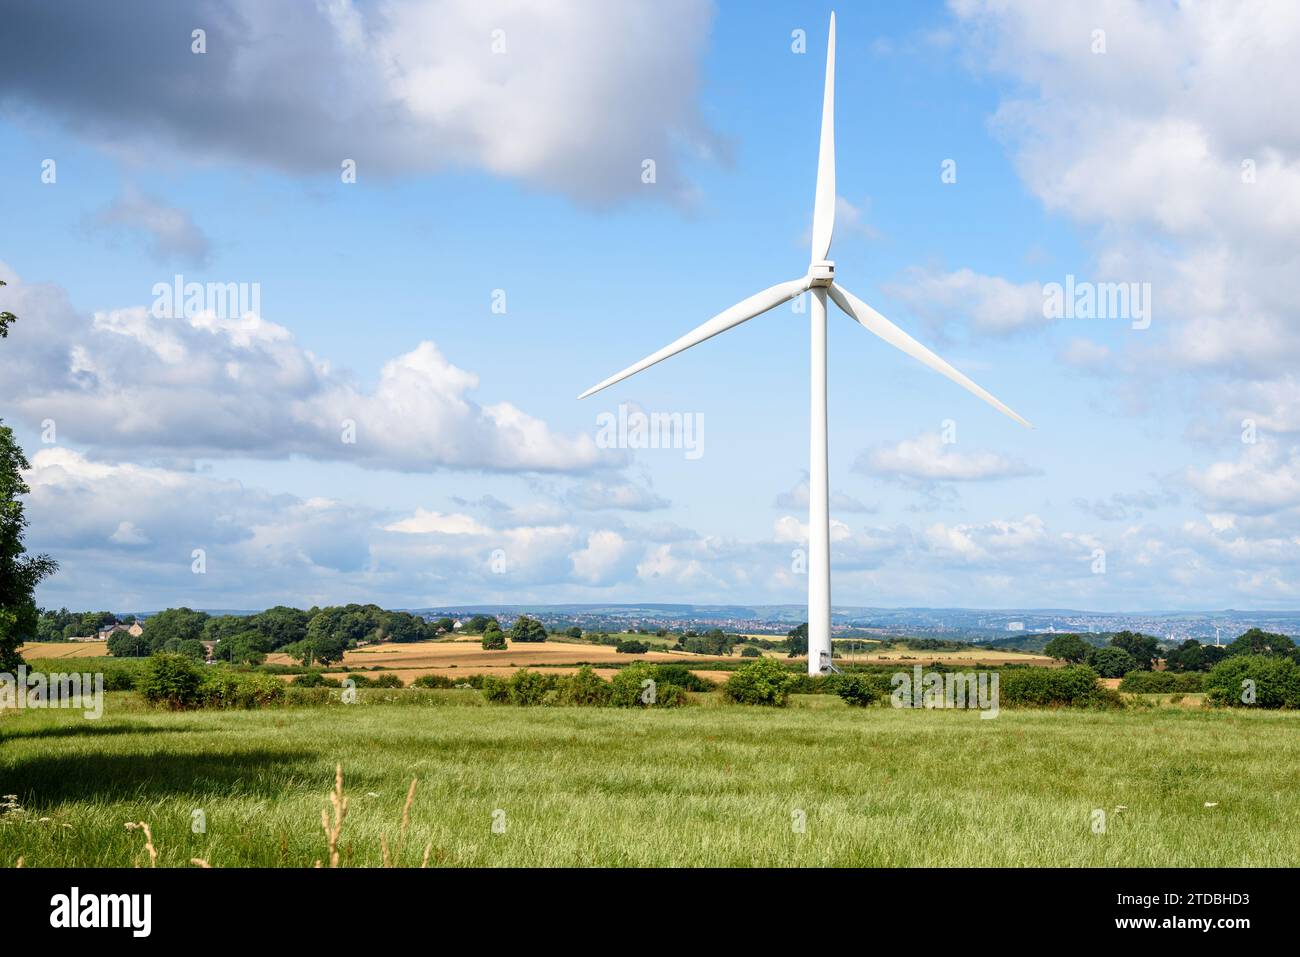 Tall wind turbine in a rolling rural landscape on a sunny summer day. A city is visible in background. Stock Photo